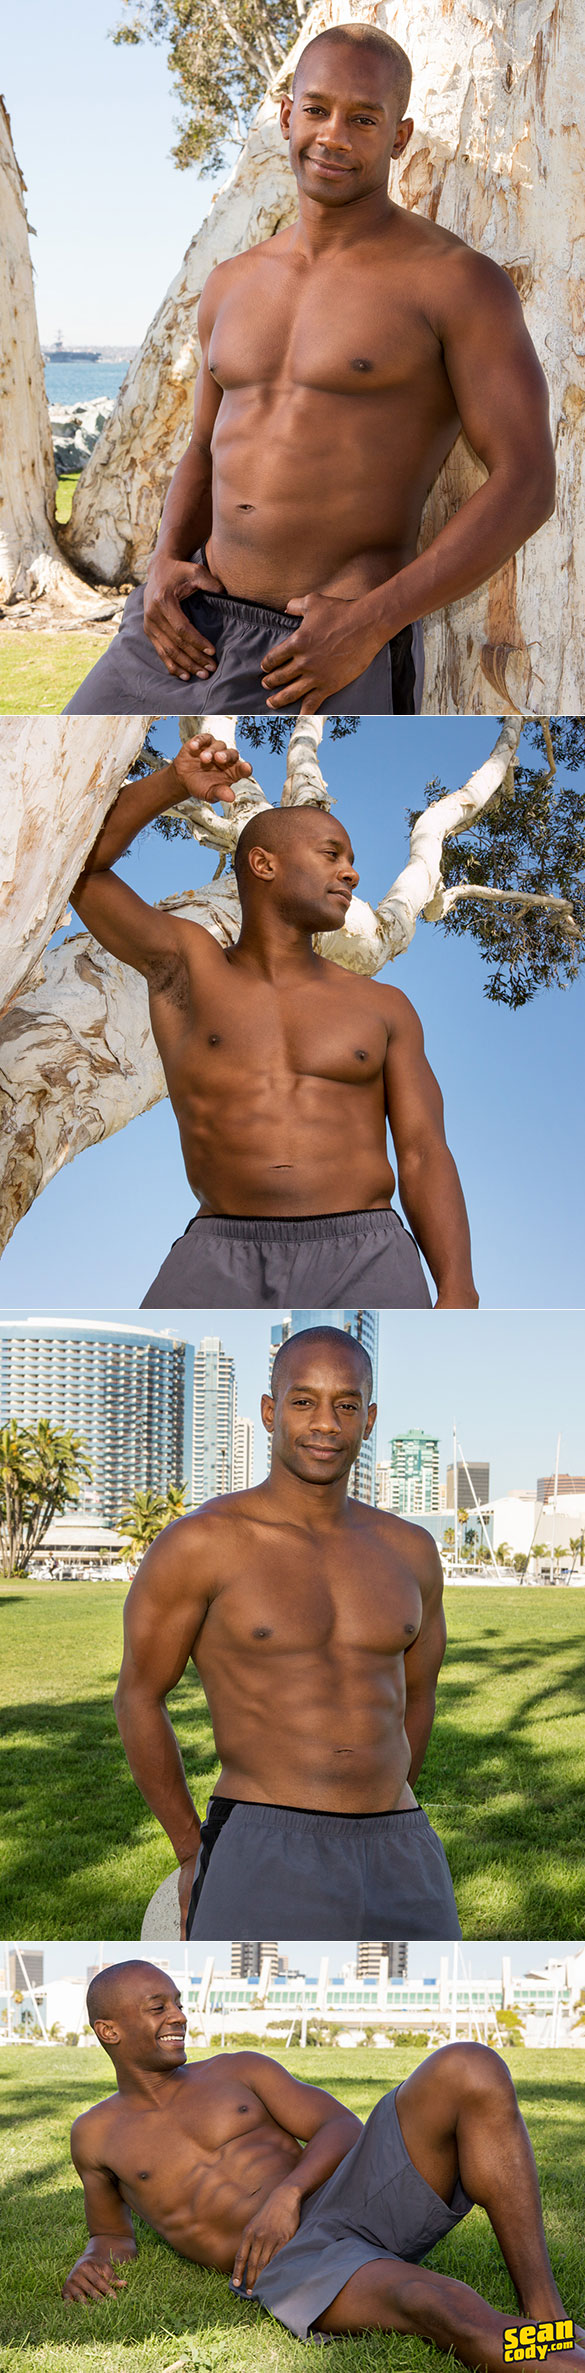 Sean Cody: Jermaine rubs one out